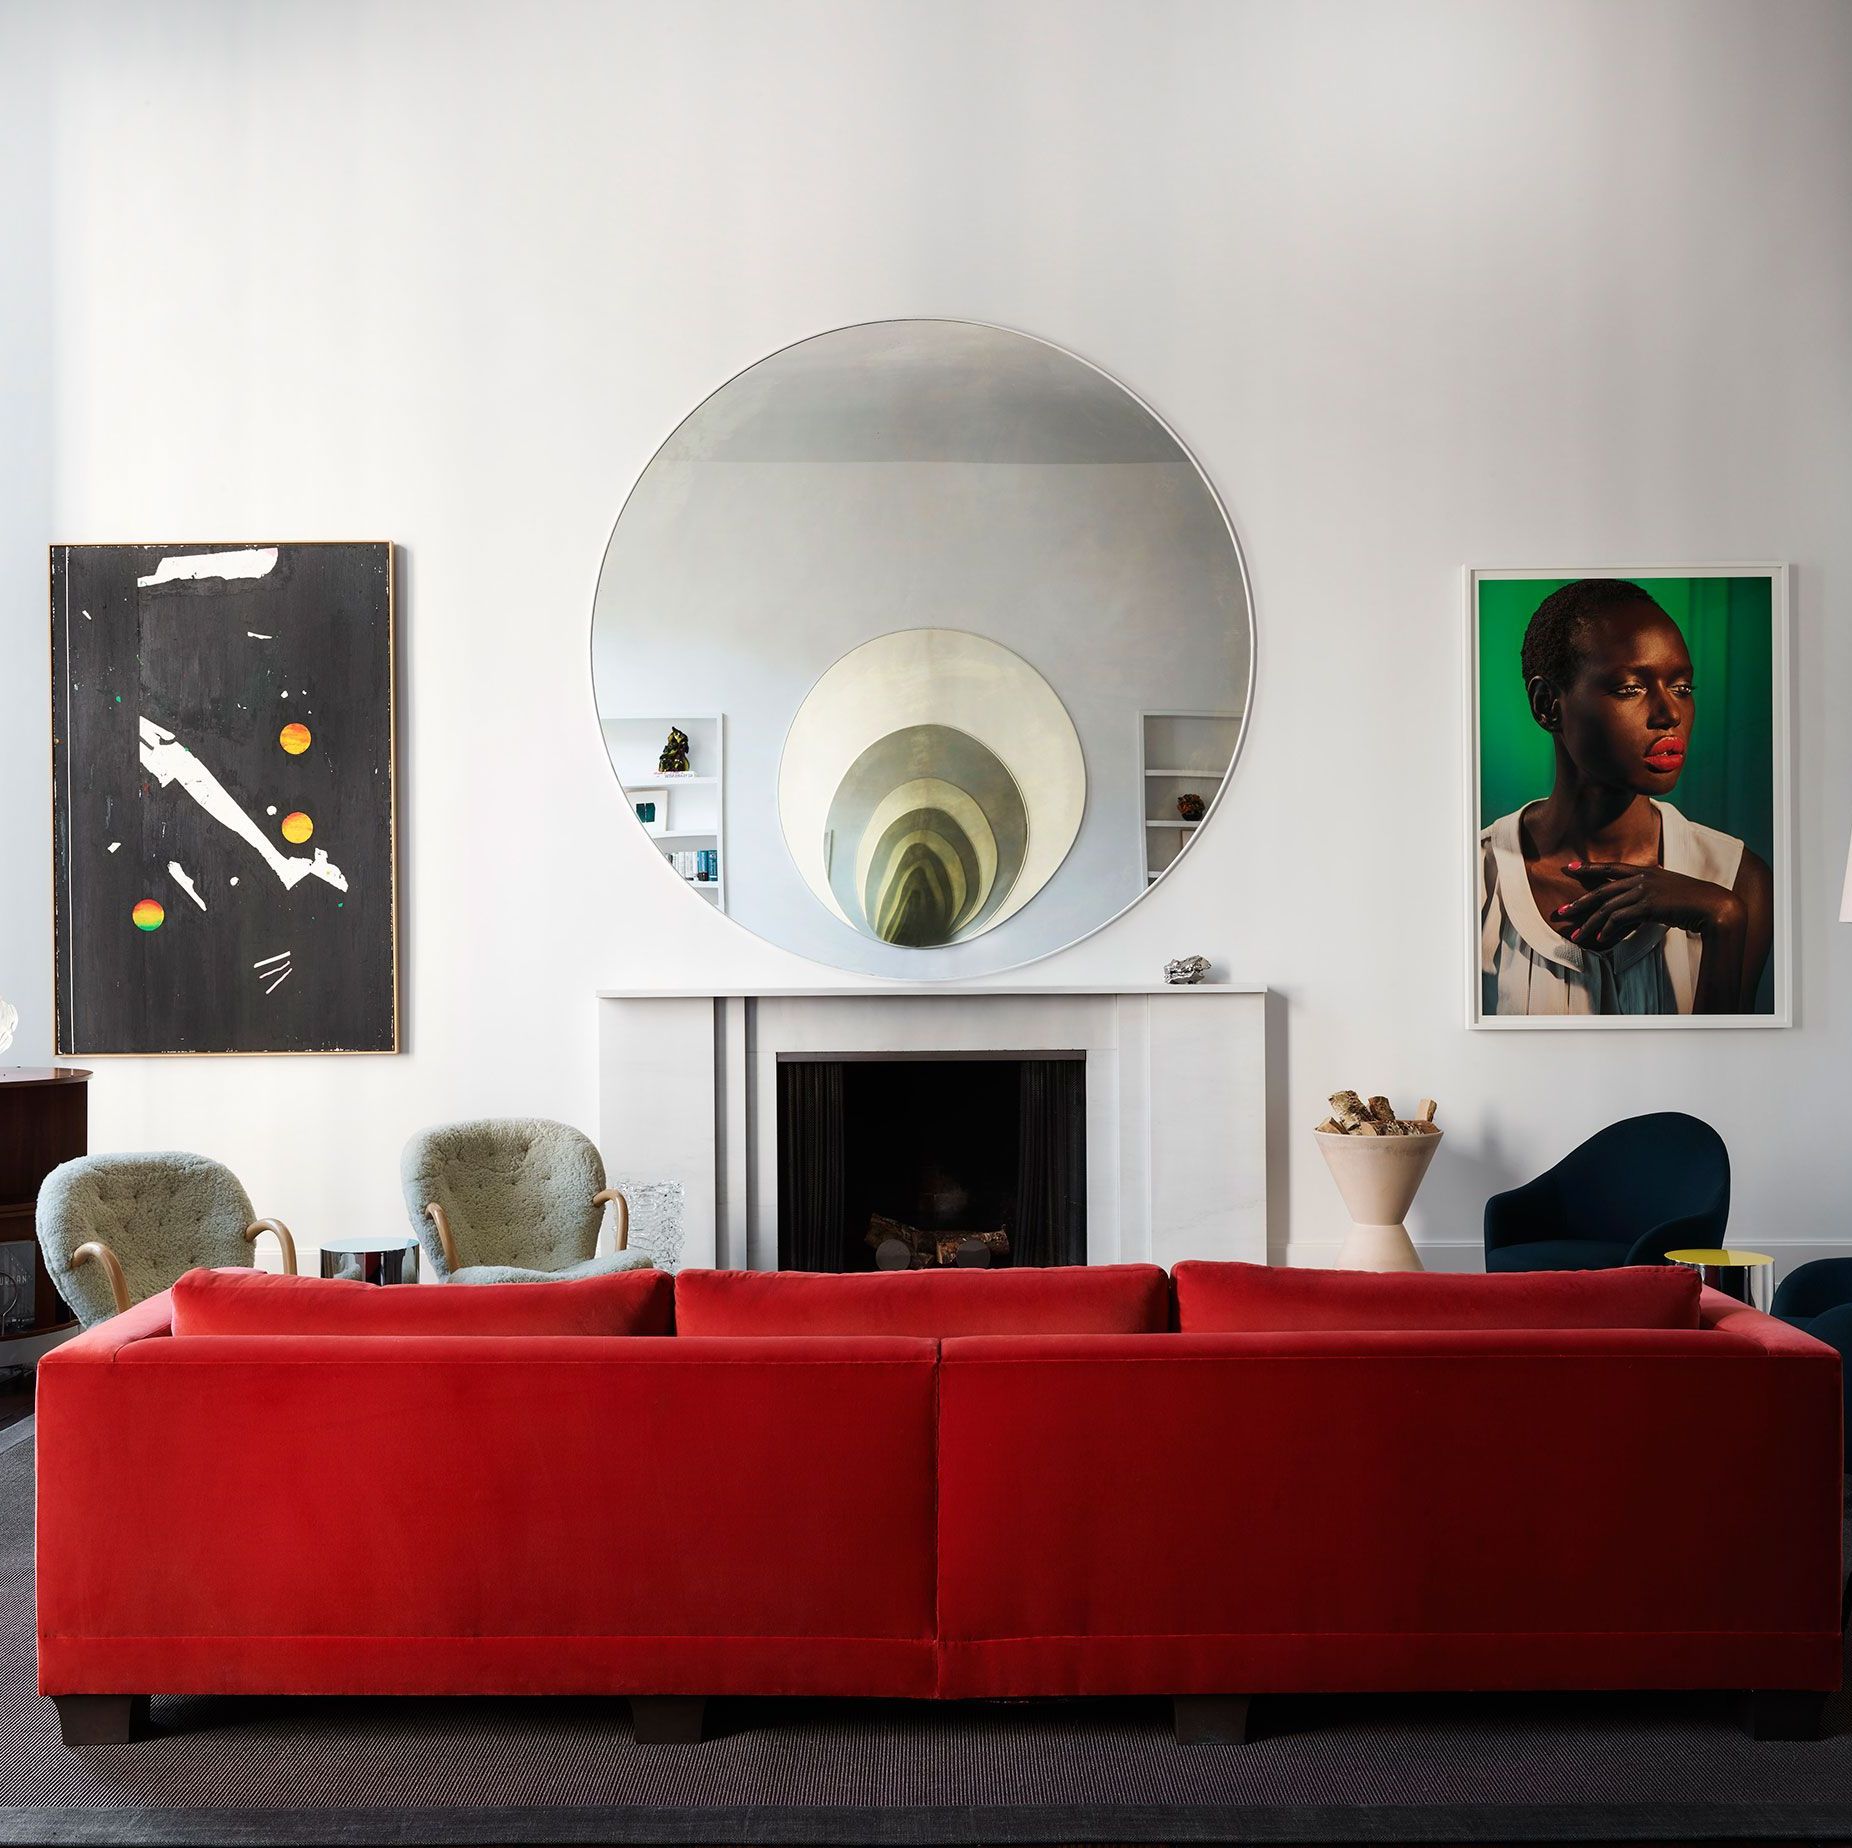 This Sultry New York Apartment Puts the 'Art' in Art Deco